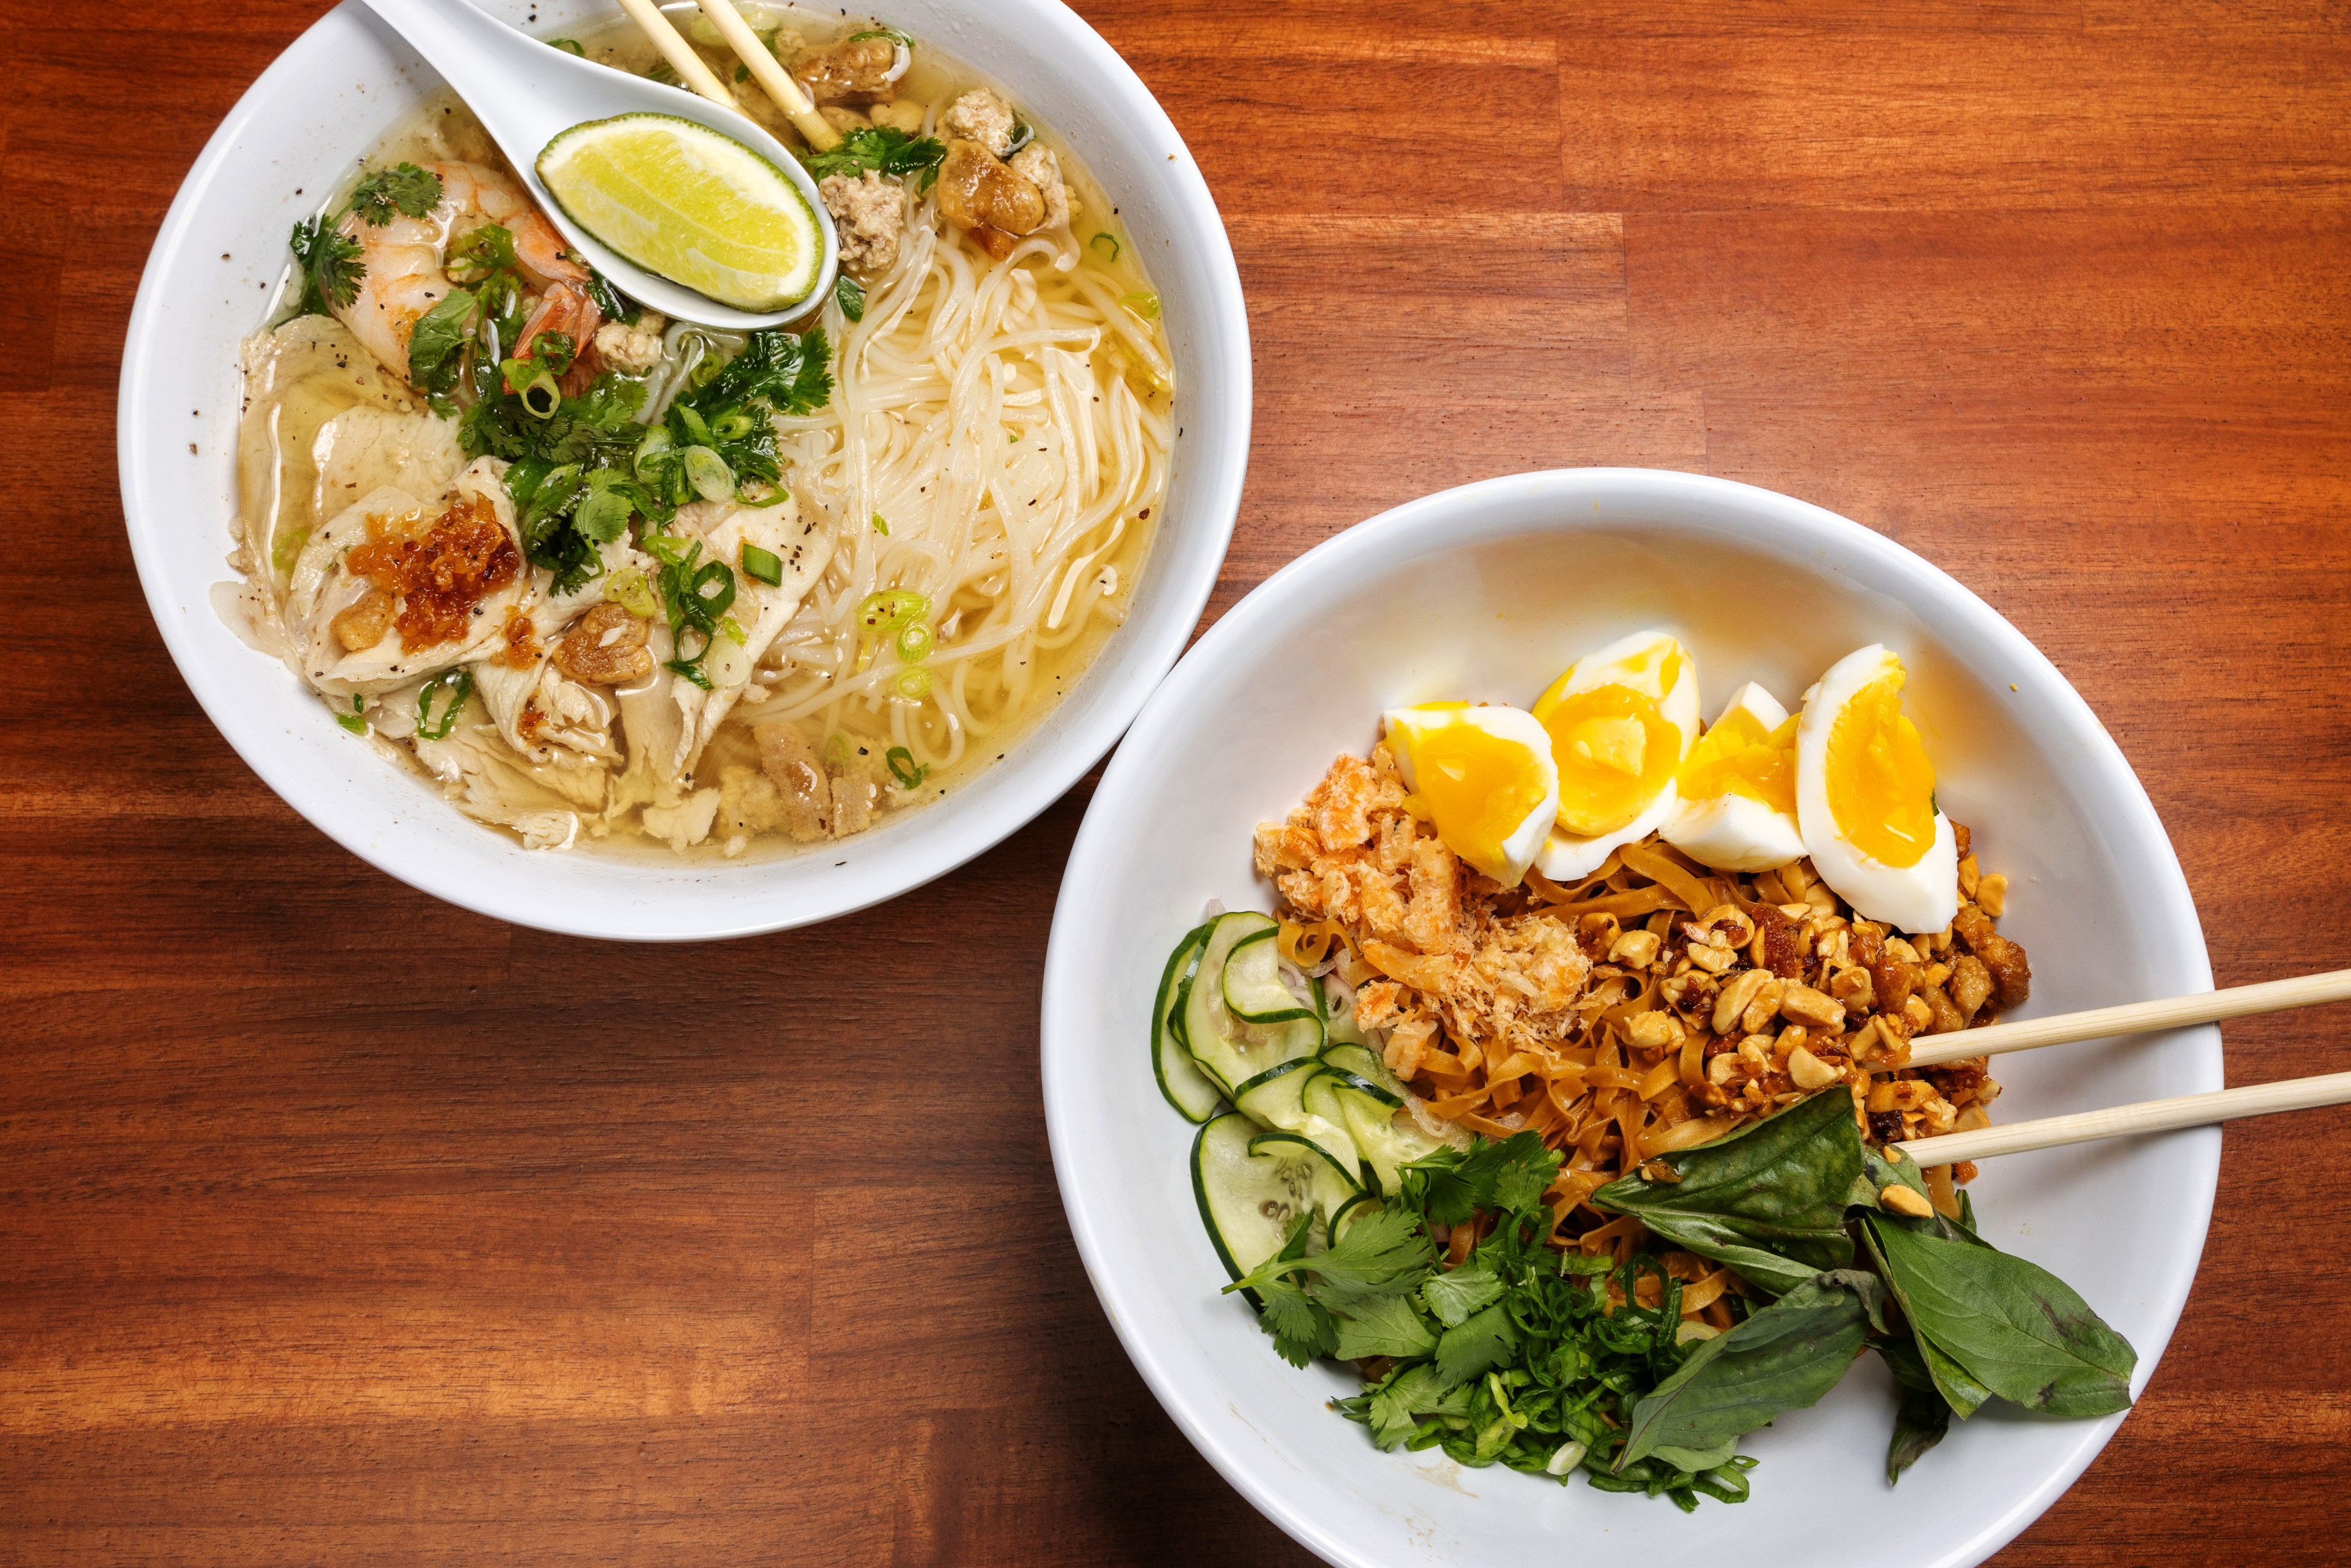 The Kuy Teav Phnom Penh noodle soup (left) and Mee Kola bowl sit on a table in Lunette Cambodia